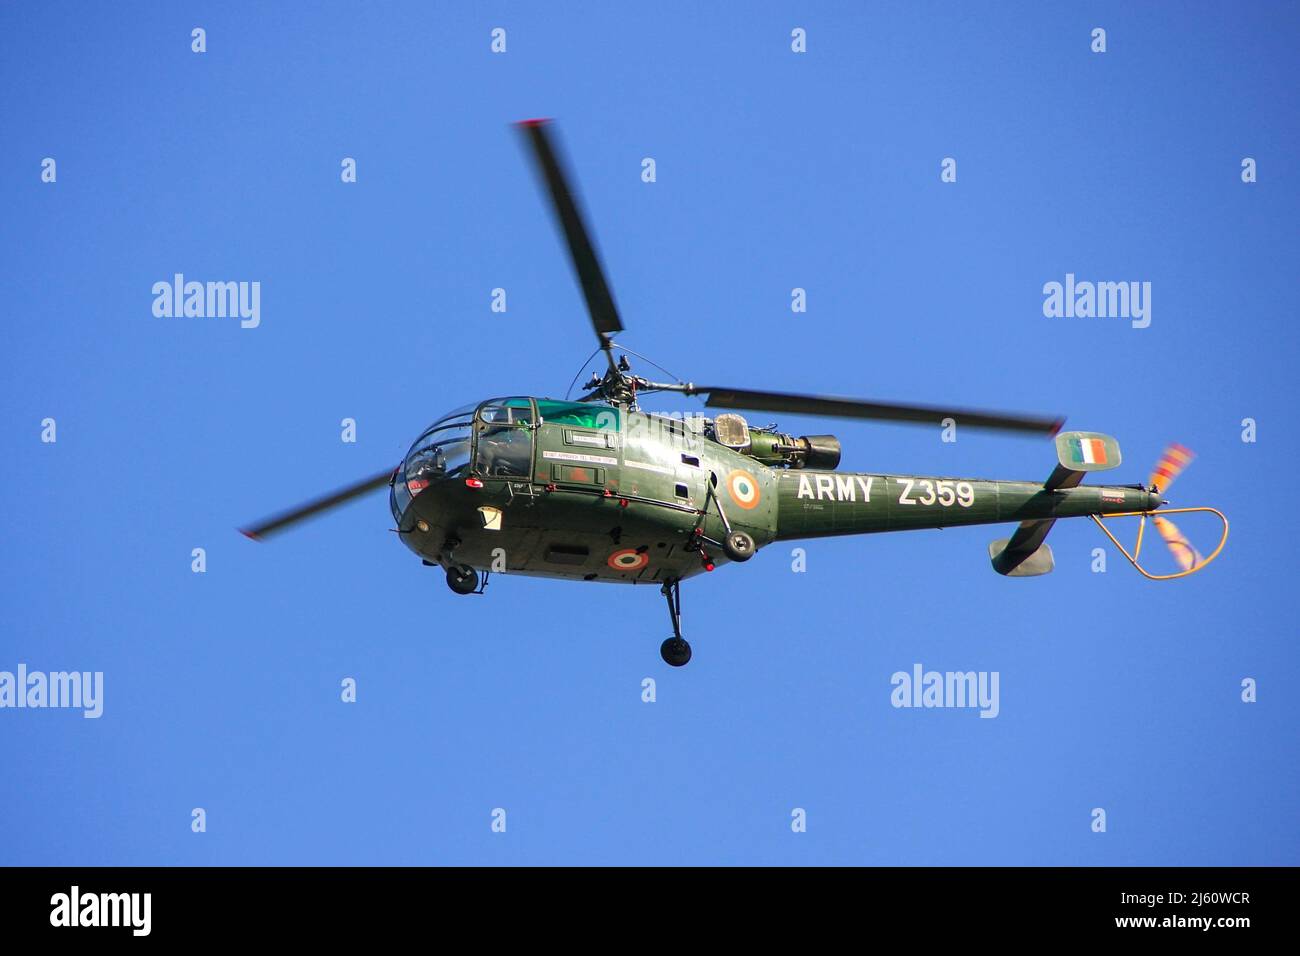 Military helicopter in blue sky, Jaipur, Rajasthan, India. The Army Aviation Corps is a component of the Indian Army, formed on 1 November 1986. Stock Photo